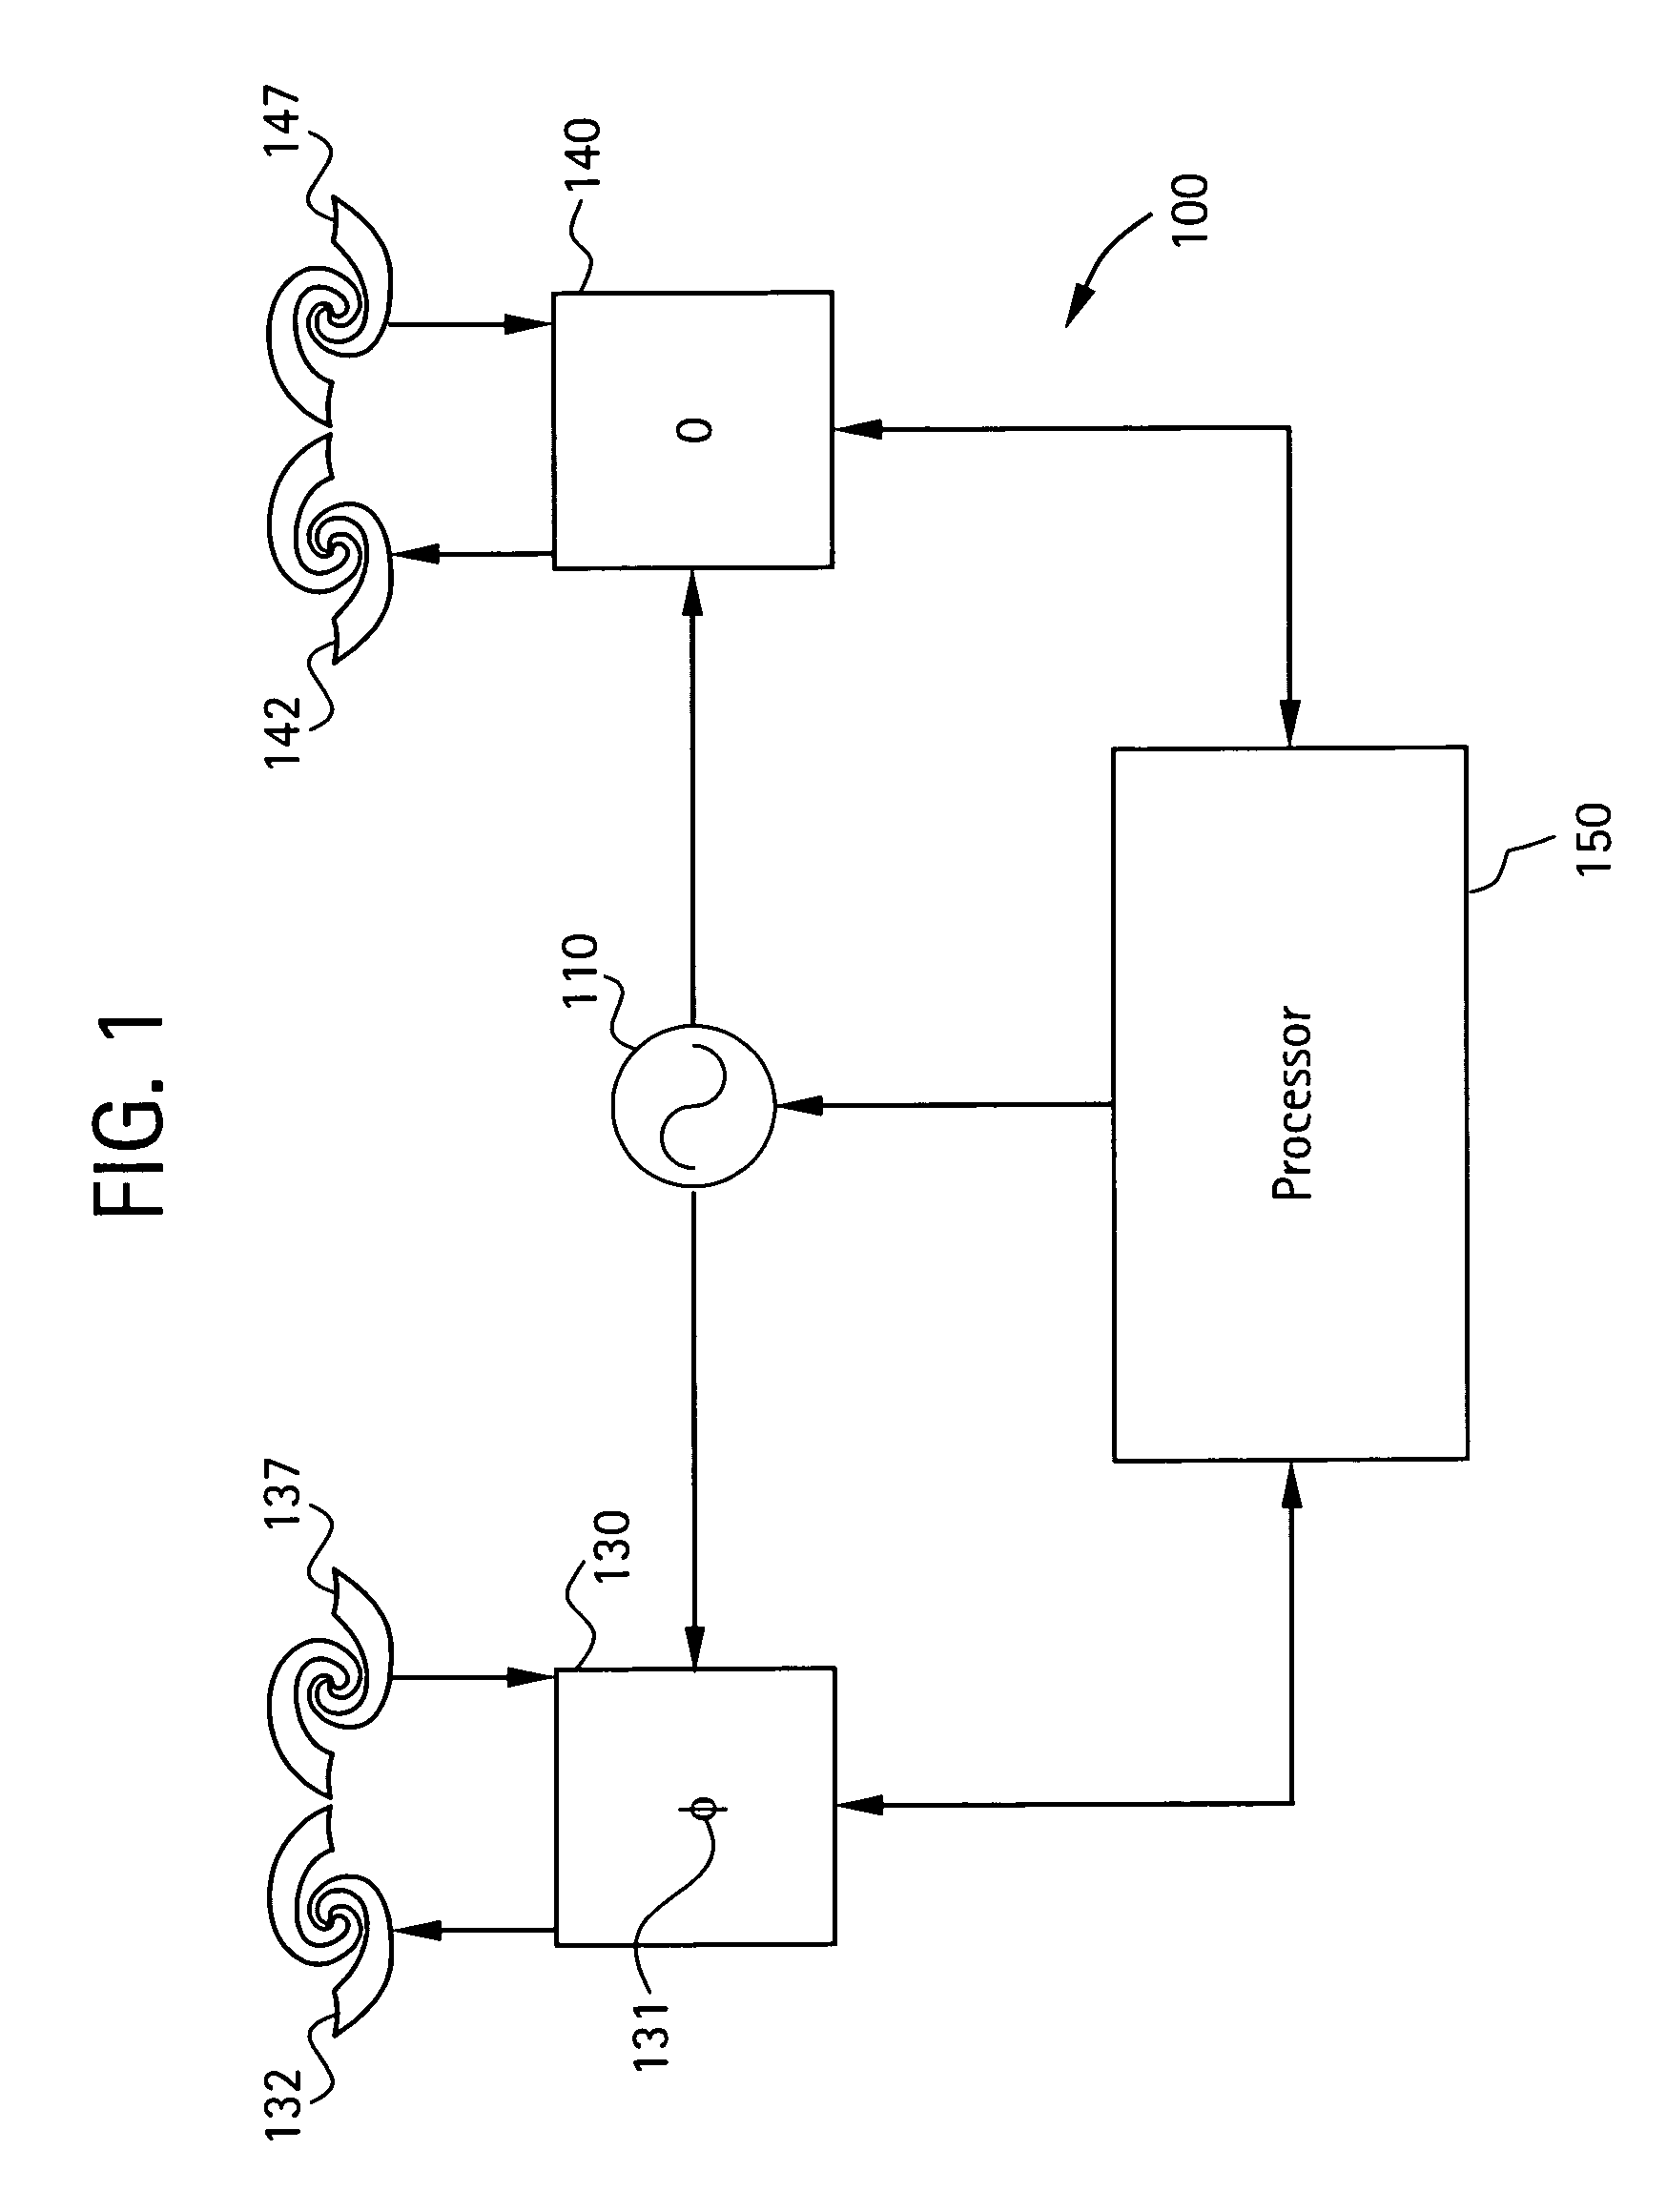 Radio detection and ranging intrusion detection system